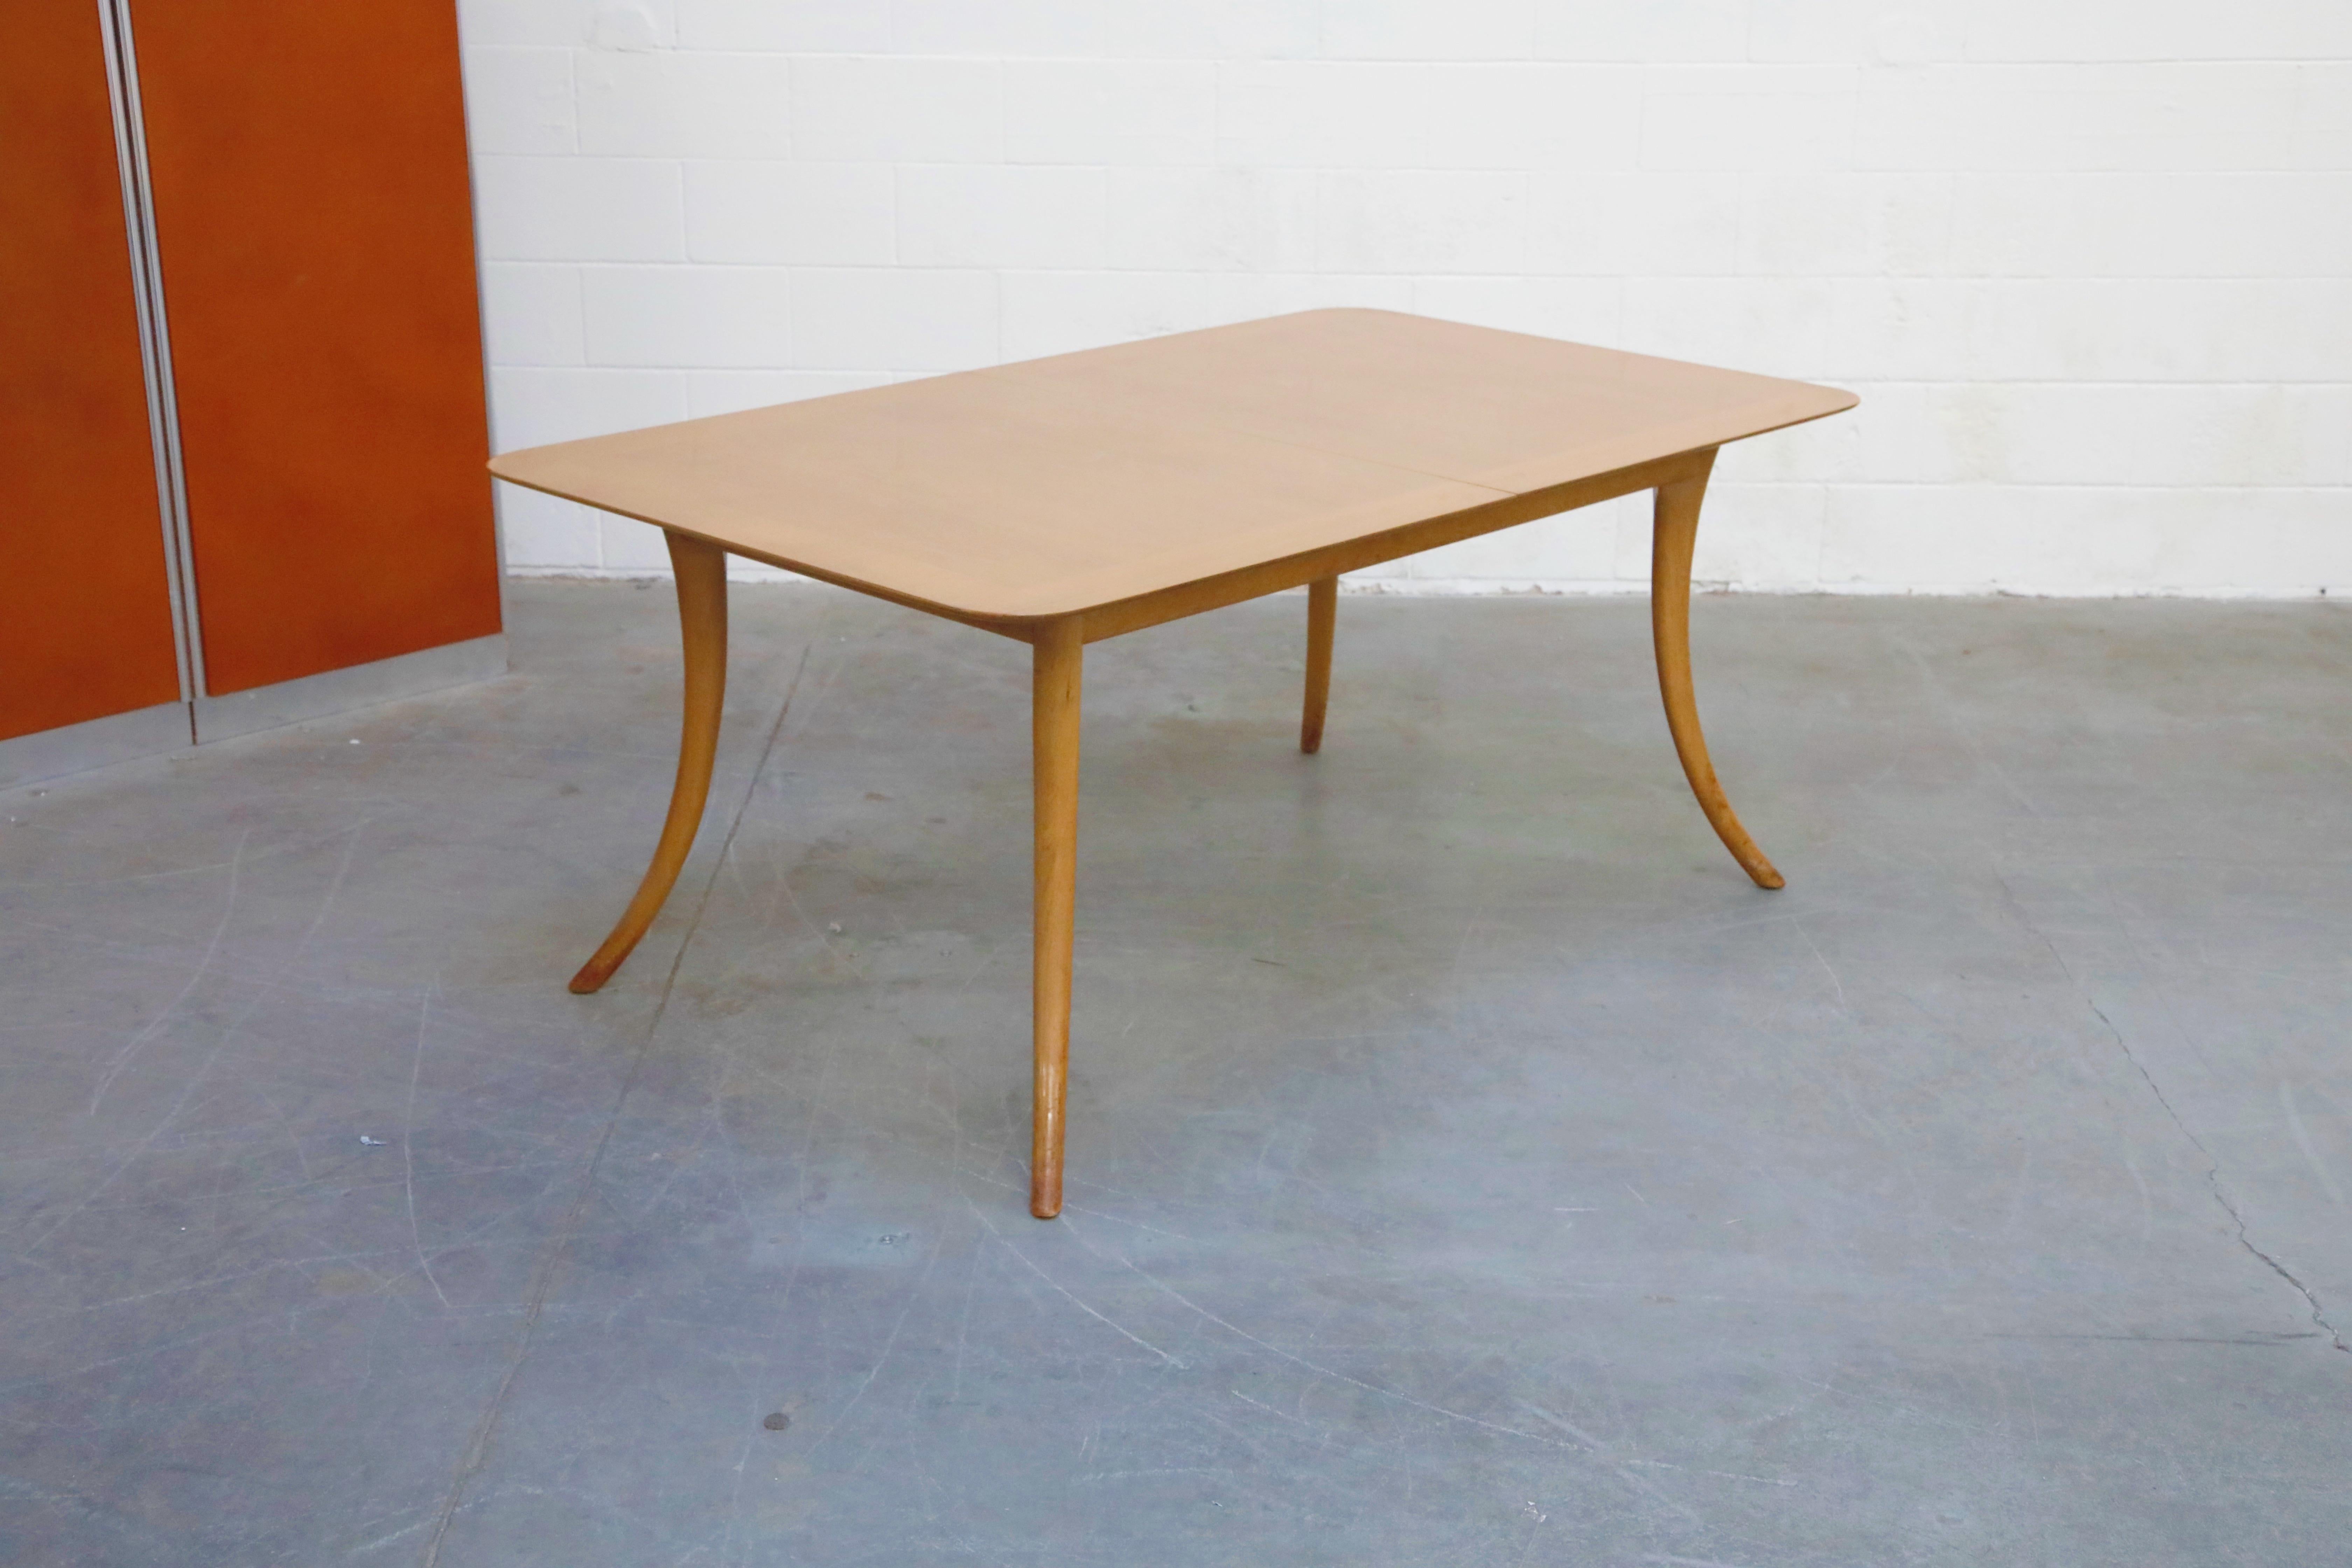 American Expandable Dining Table by T.H. Robsjohn-Gibbings for Widdicomb, 1957, Signed